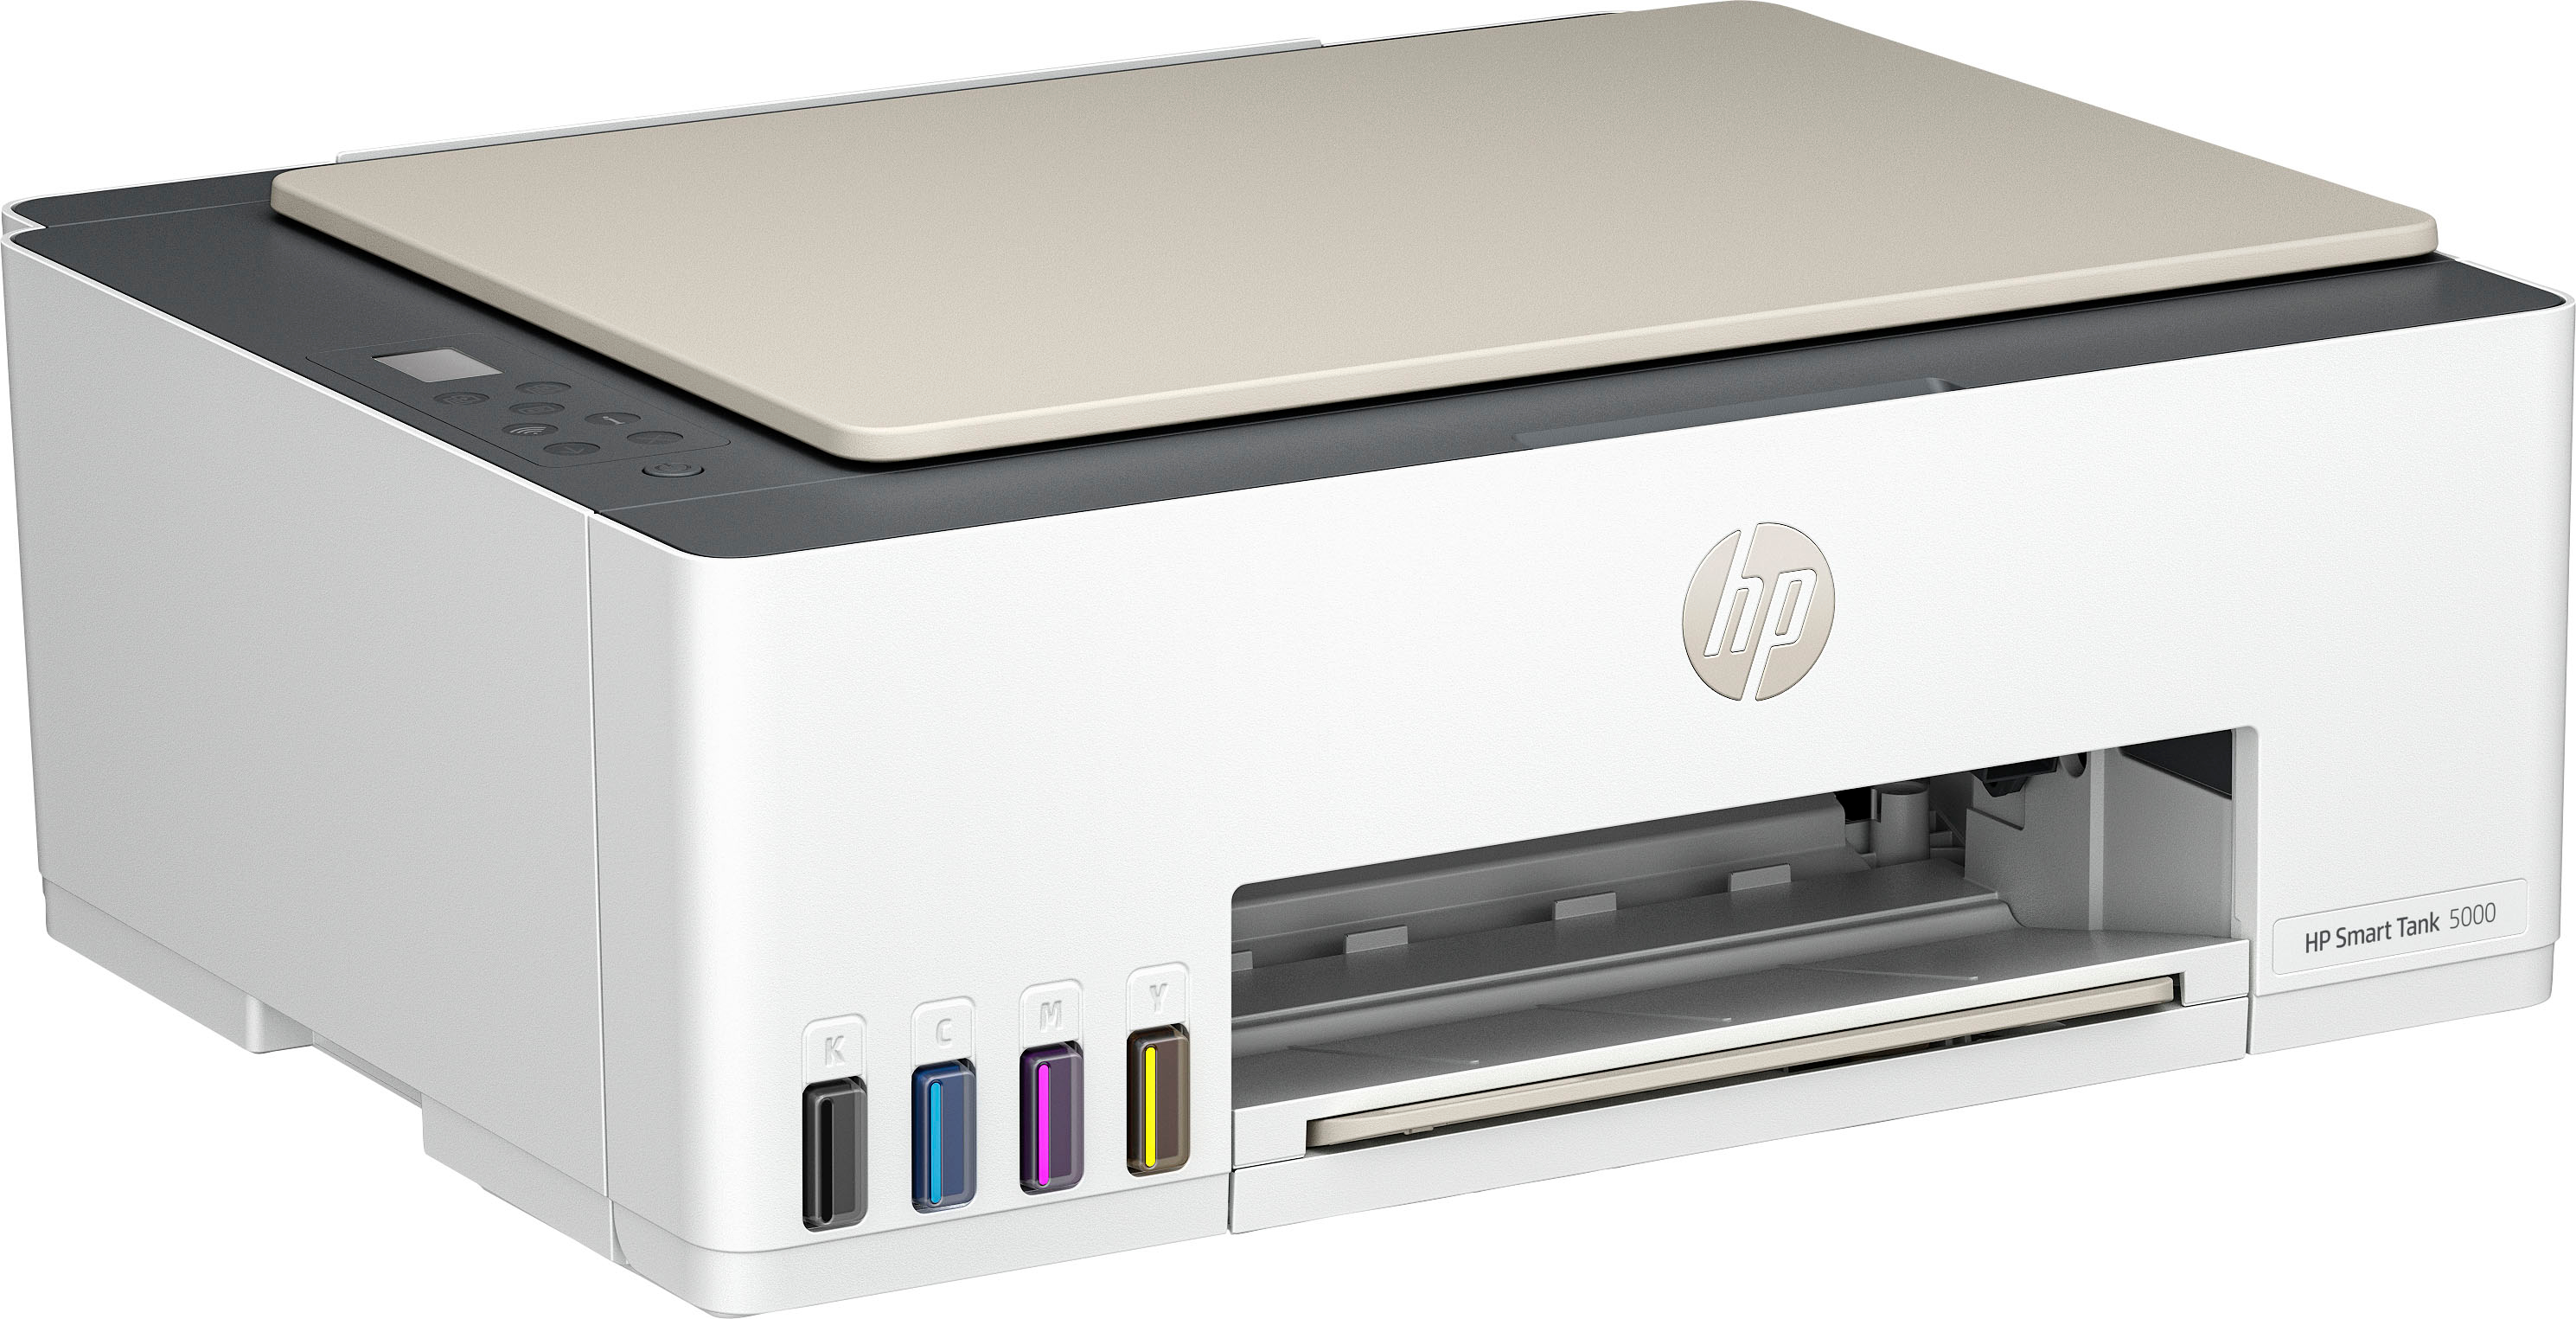 HP Smart Tank 7602 review: fast, economical printing